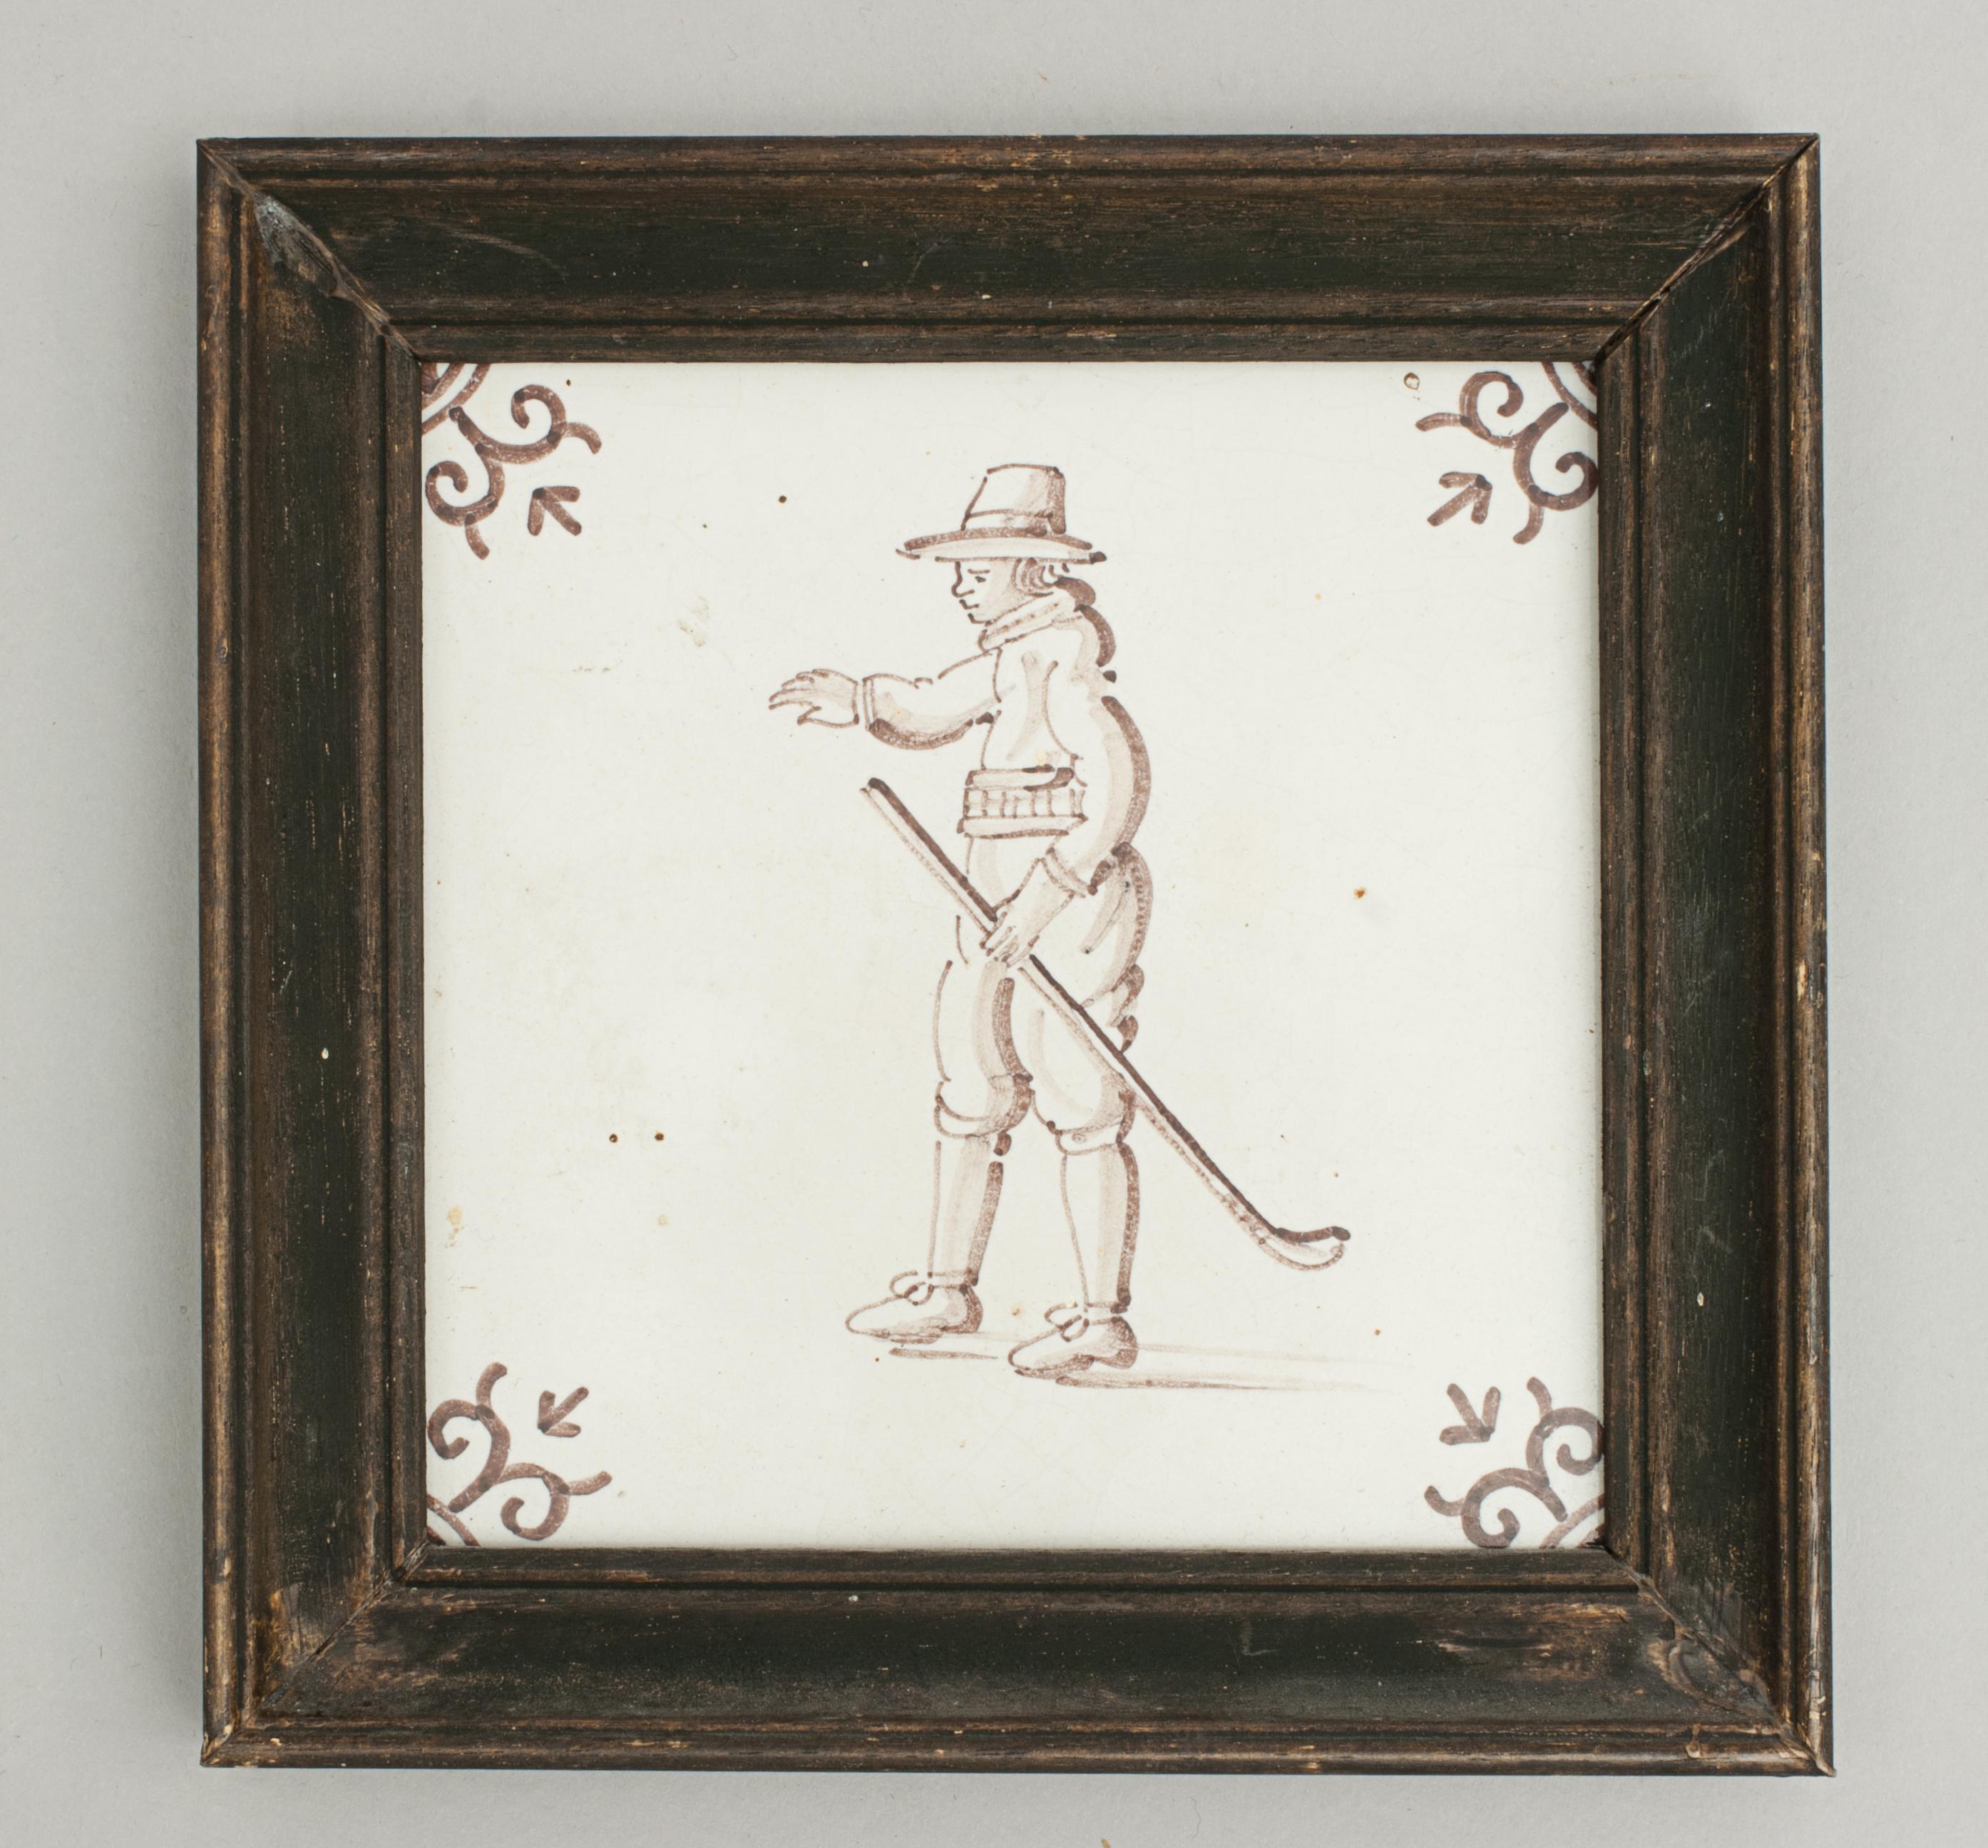 Sporting Art Antique Dutch Tile With Golf Scene. For Sale